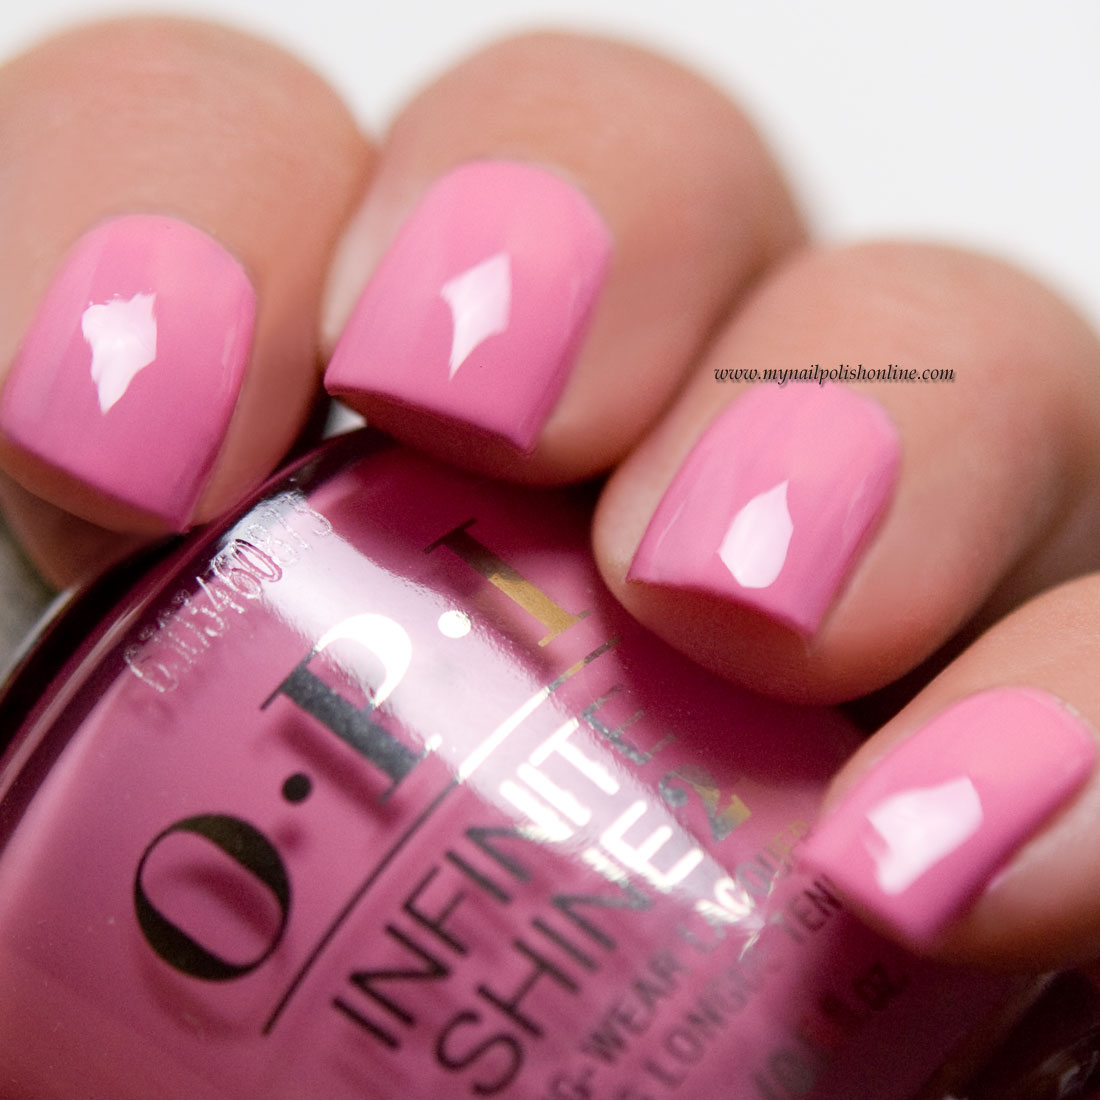 OPI Lima Tell You About This Color